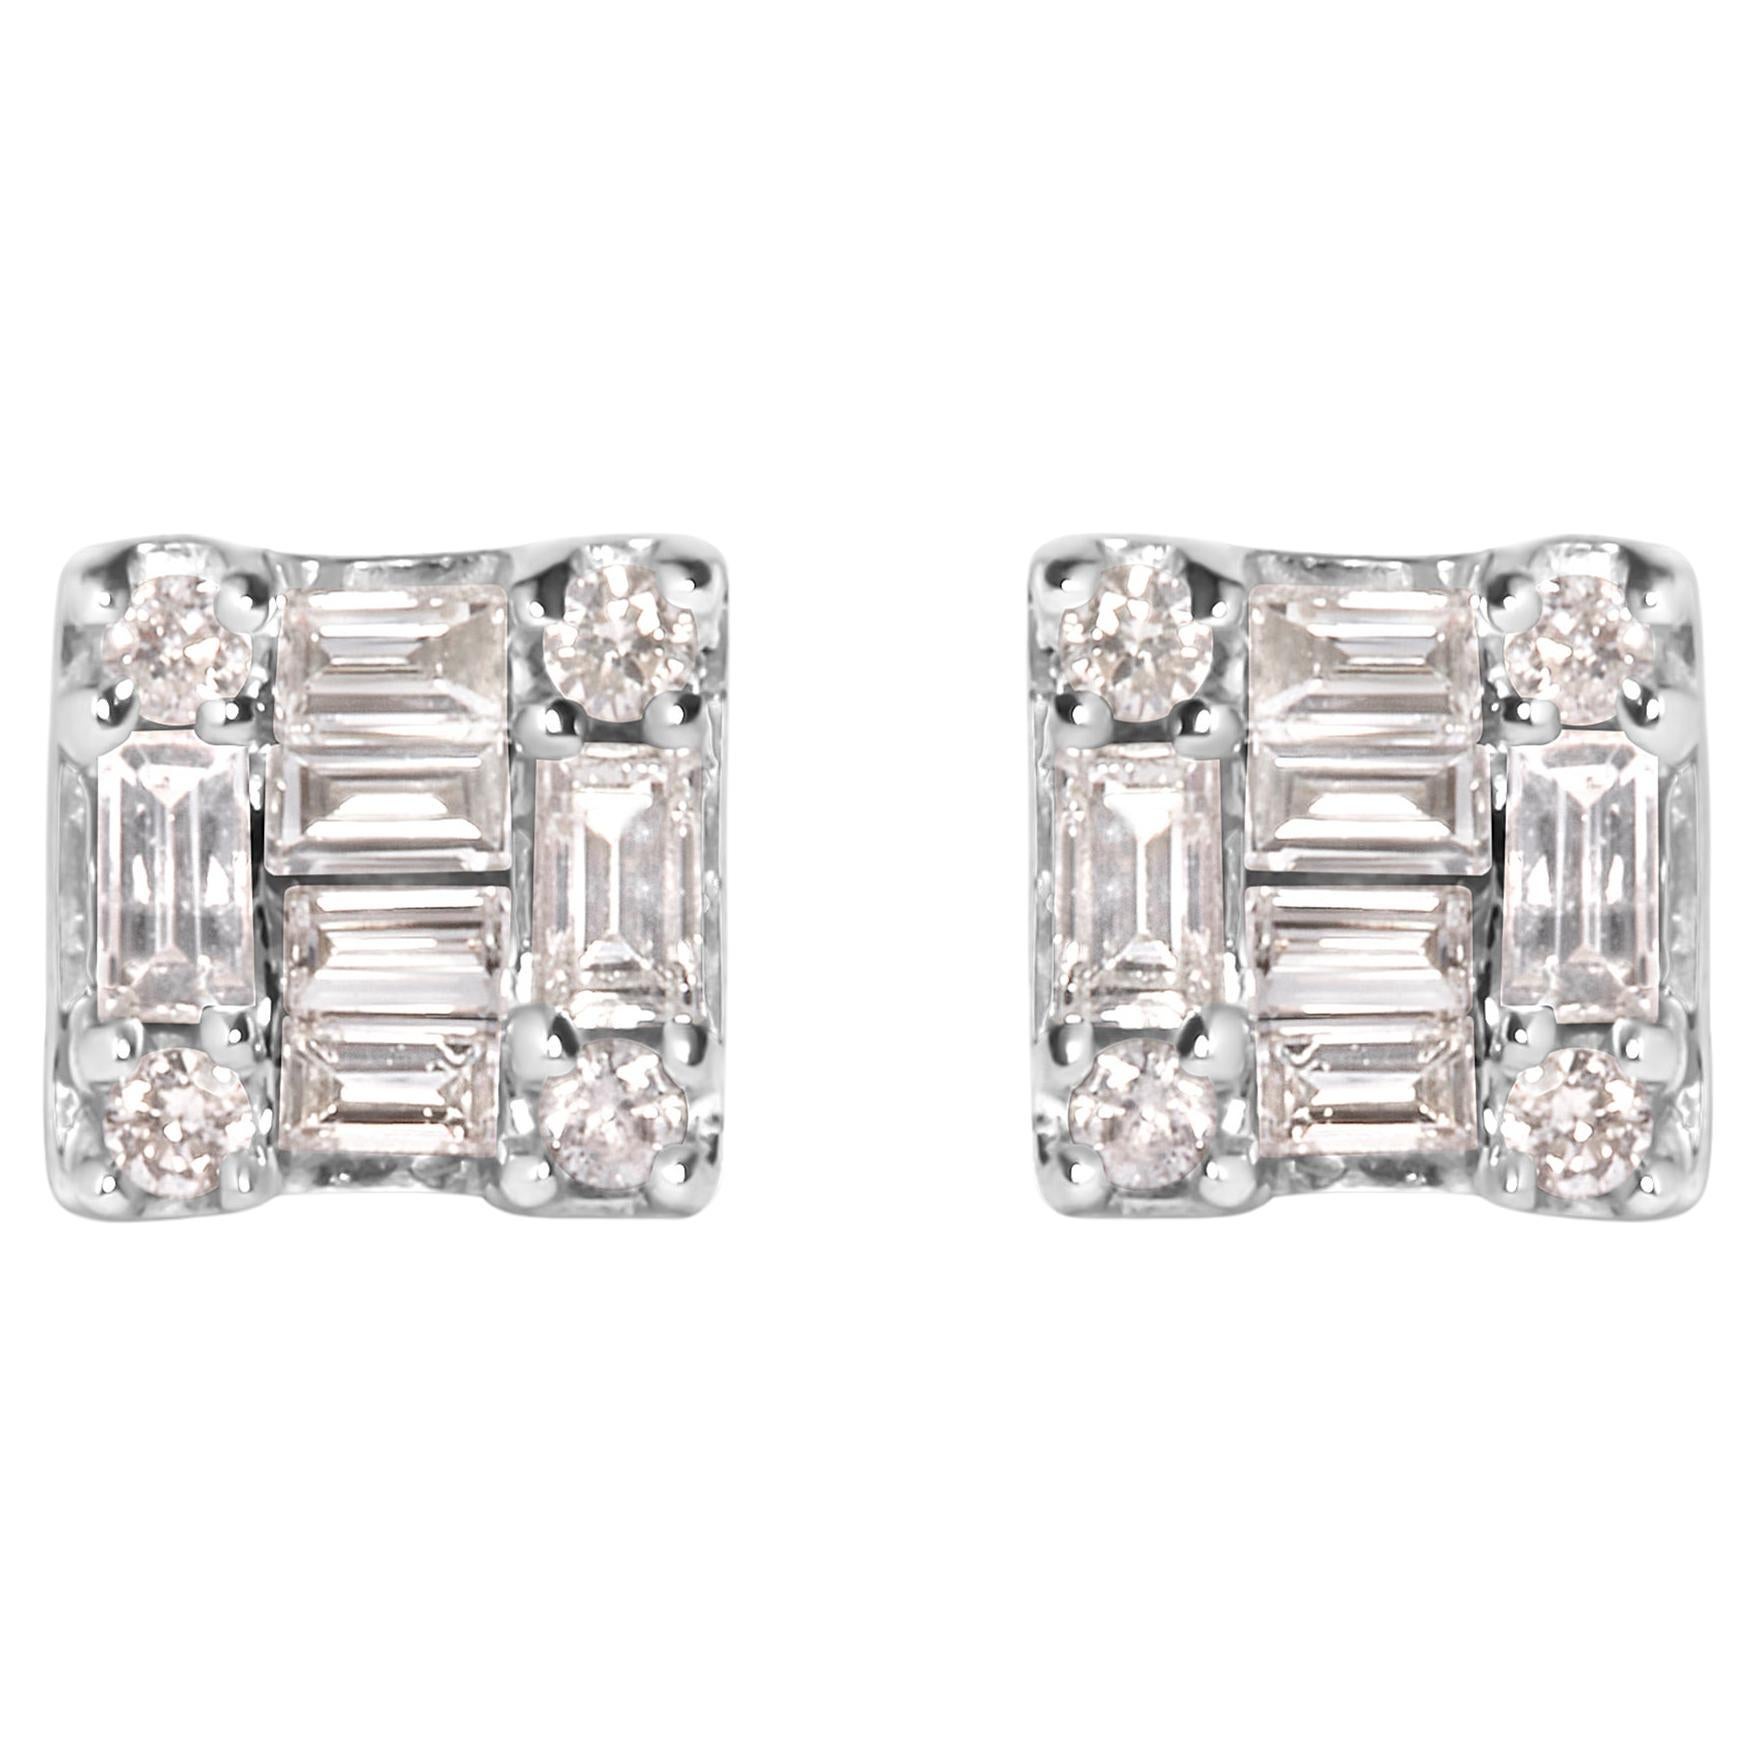 10K White Gold 1/7 Carat Round and Baguette Diamond Mosaic Square Stud Earrings